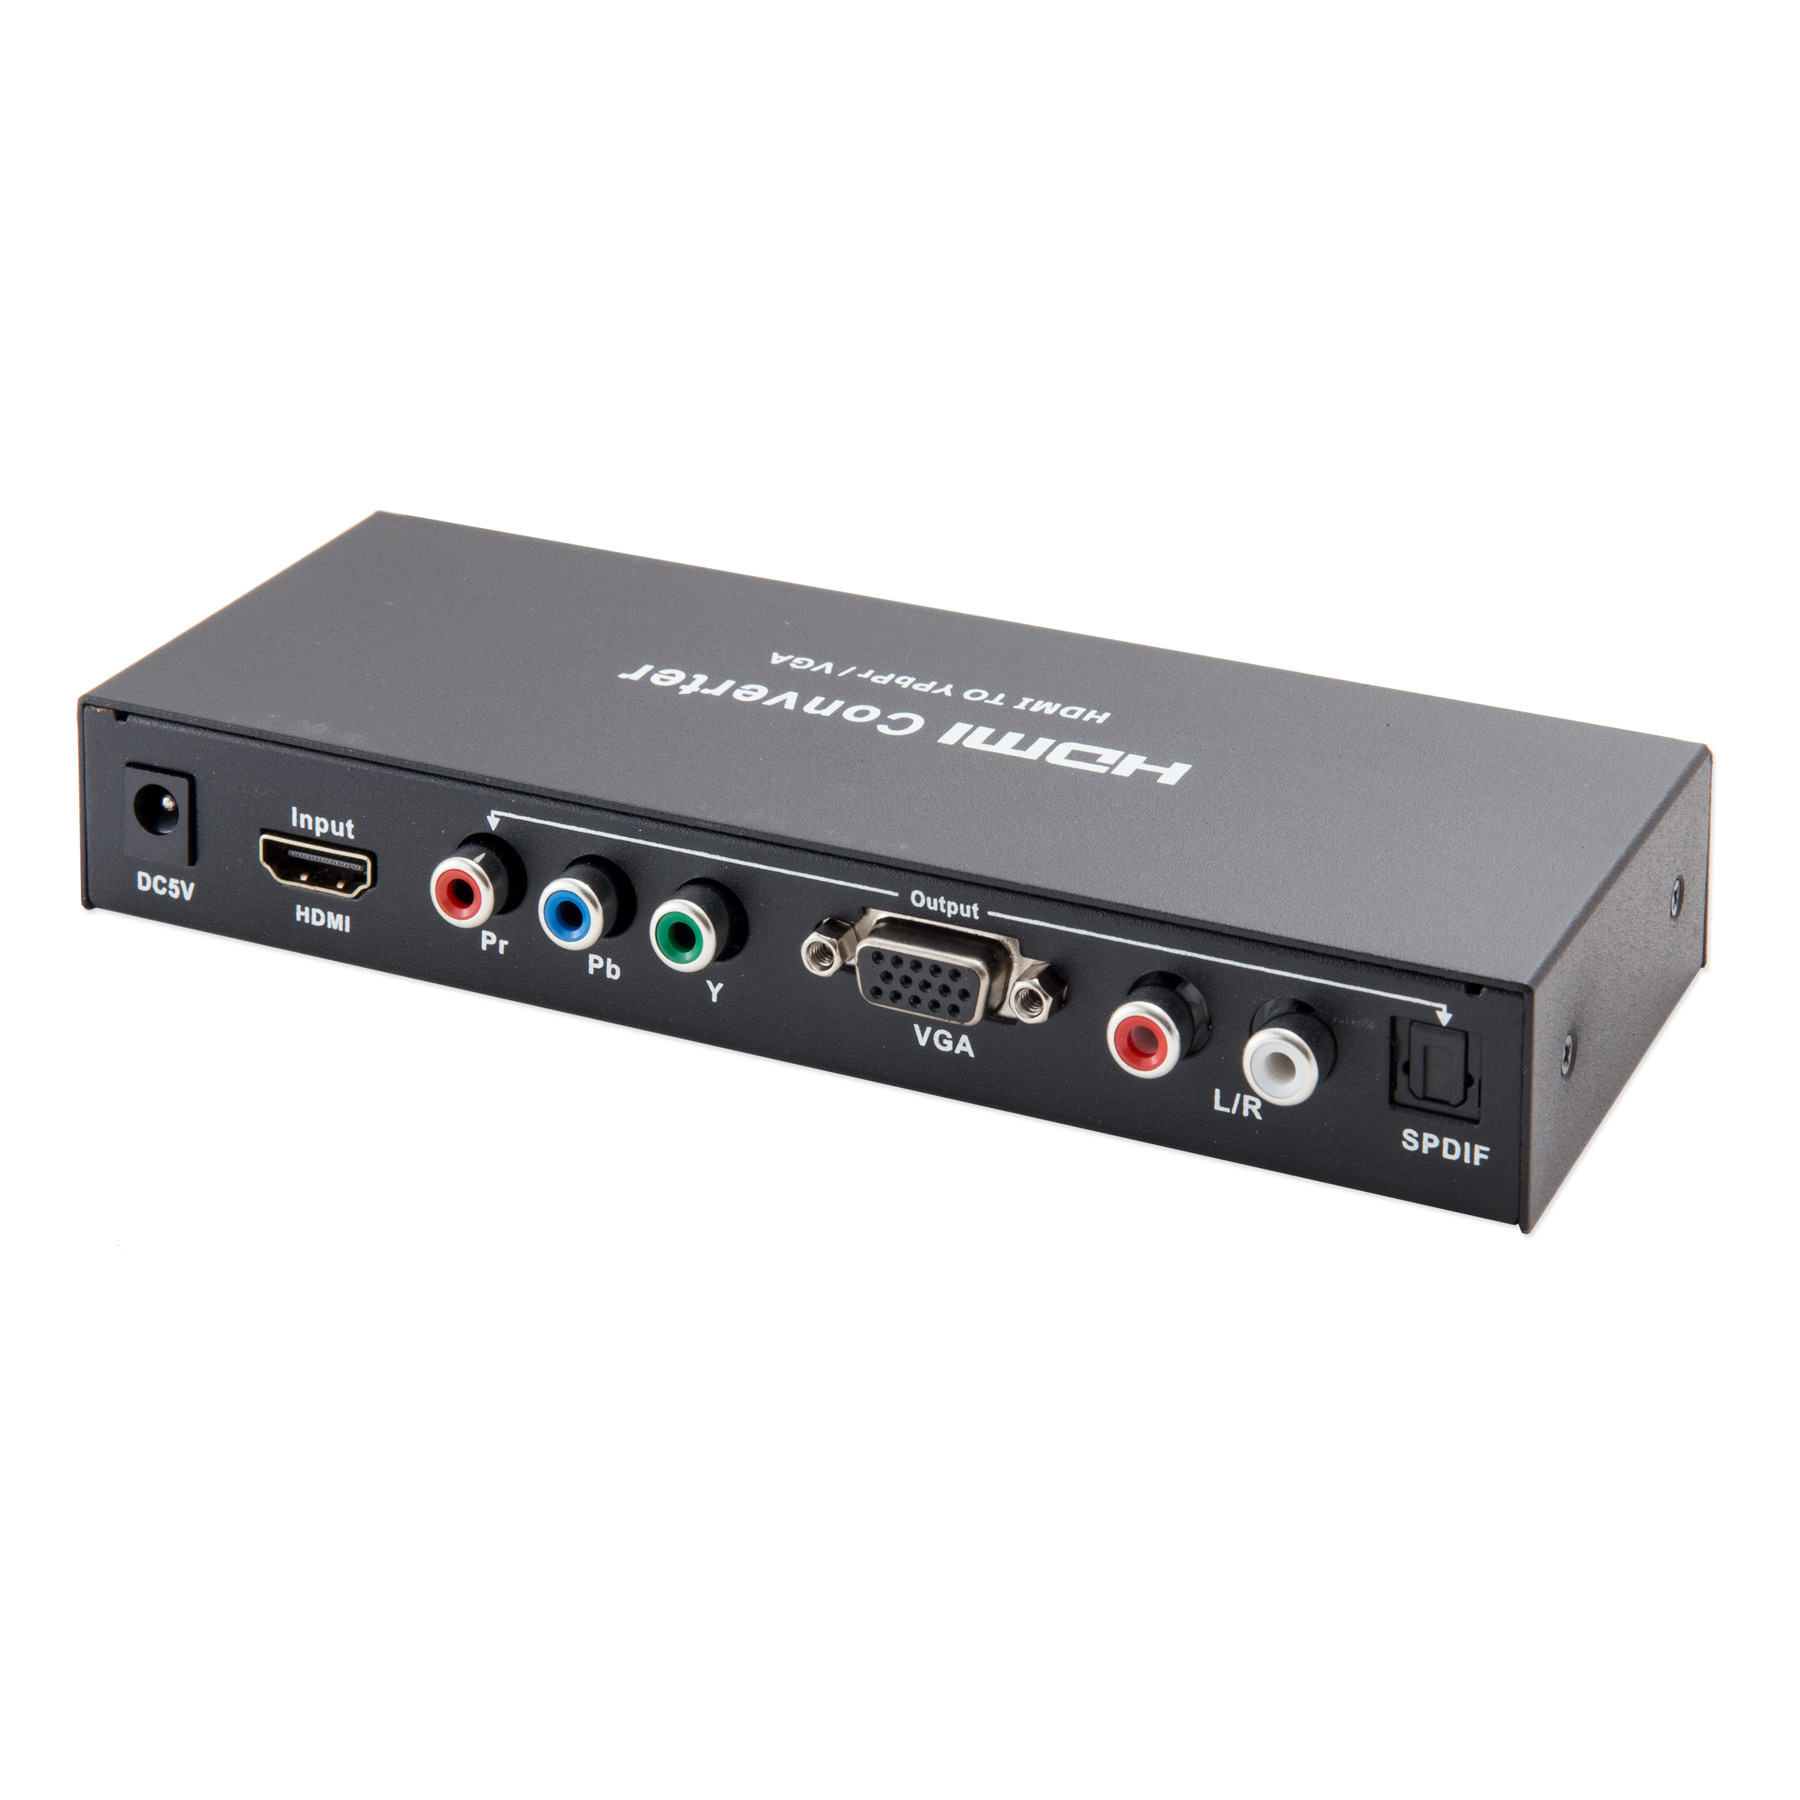 HDMI to VGA+YPbPr+Audio Converter, Input Signal Connection (HDMI), Output Signal Connections (YPbPr, VGA), Output Audio Connections (L/R Analog, SPDIF), Video Output up to 1080p, Black Color - image 1 of 5